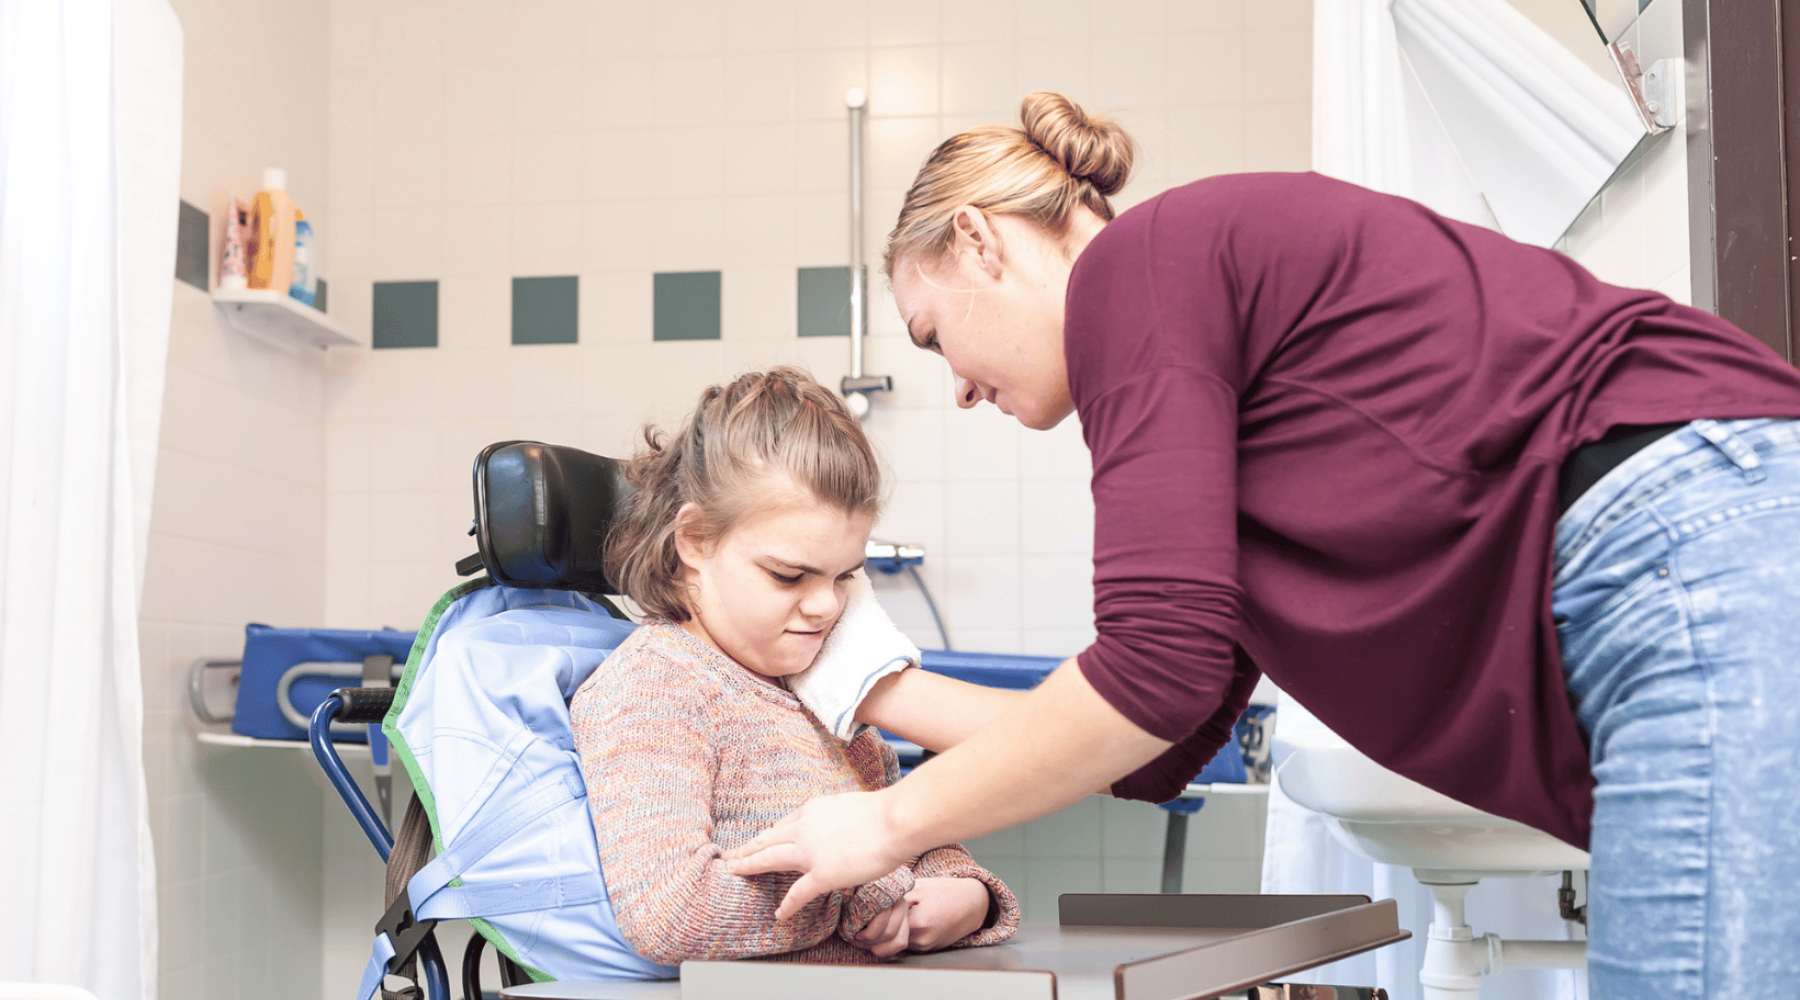 Carer looking after a person with a disability